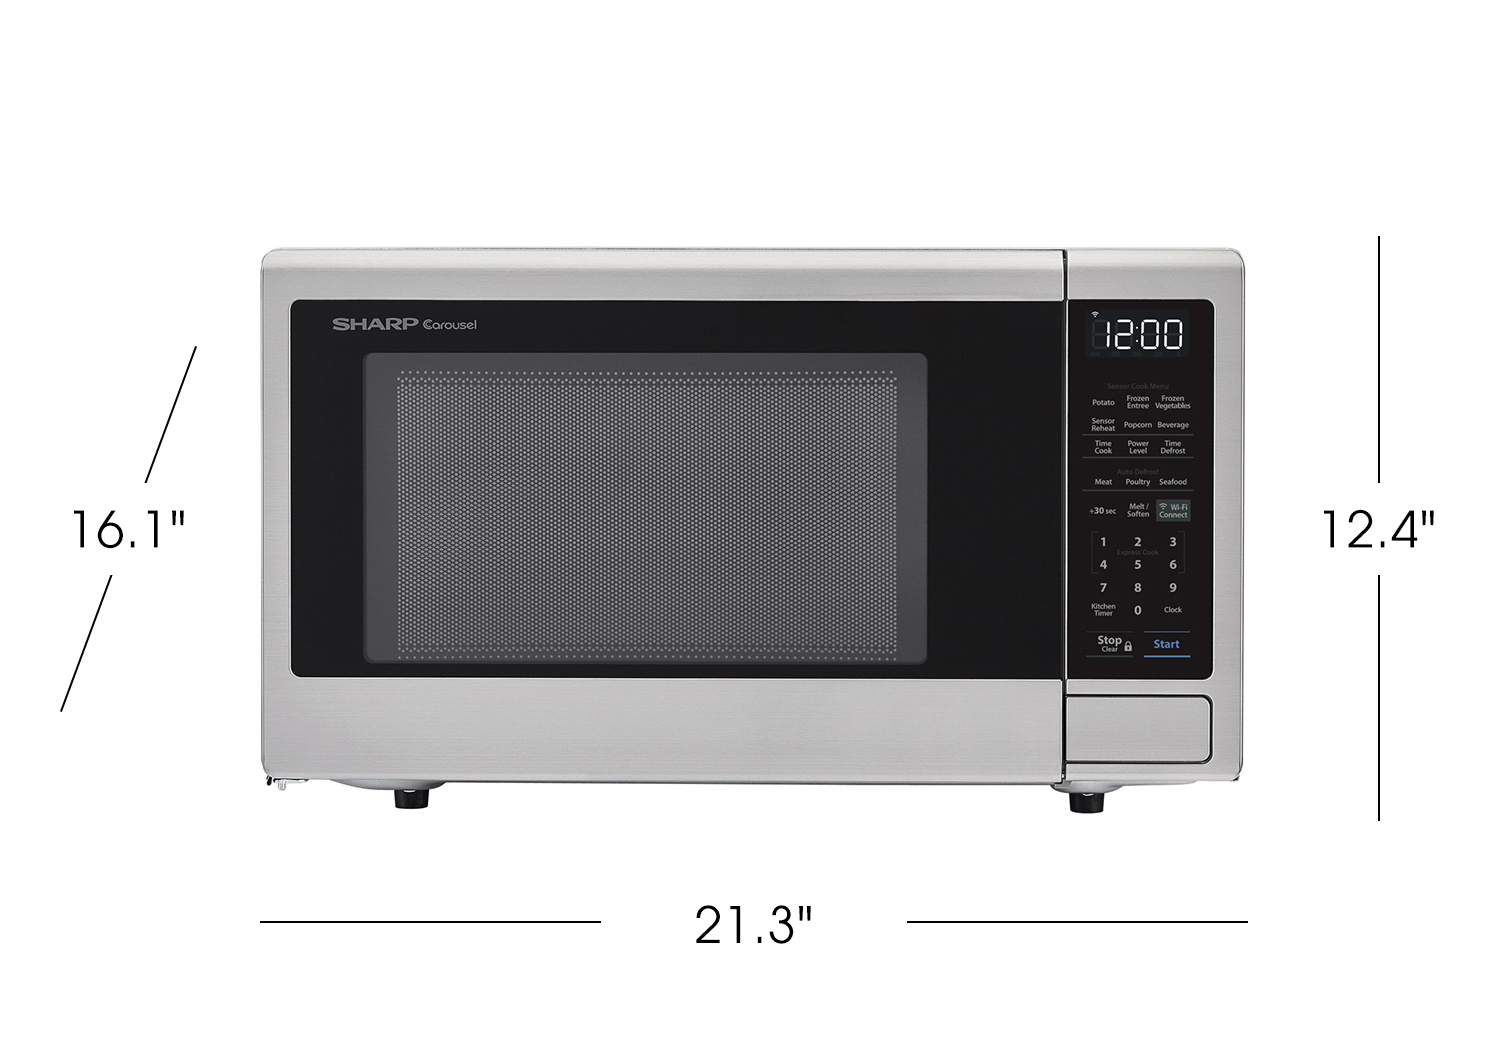 Microwave Sizes (Types & Dimensions Guide) - Designing Idea